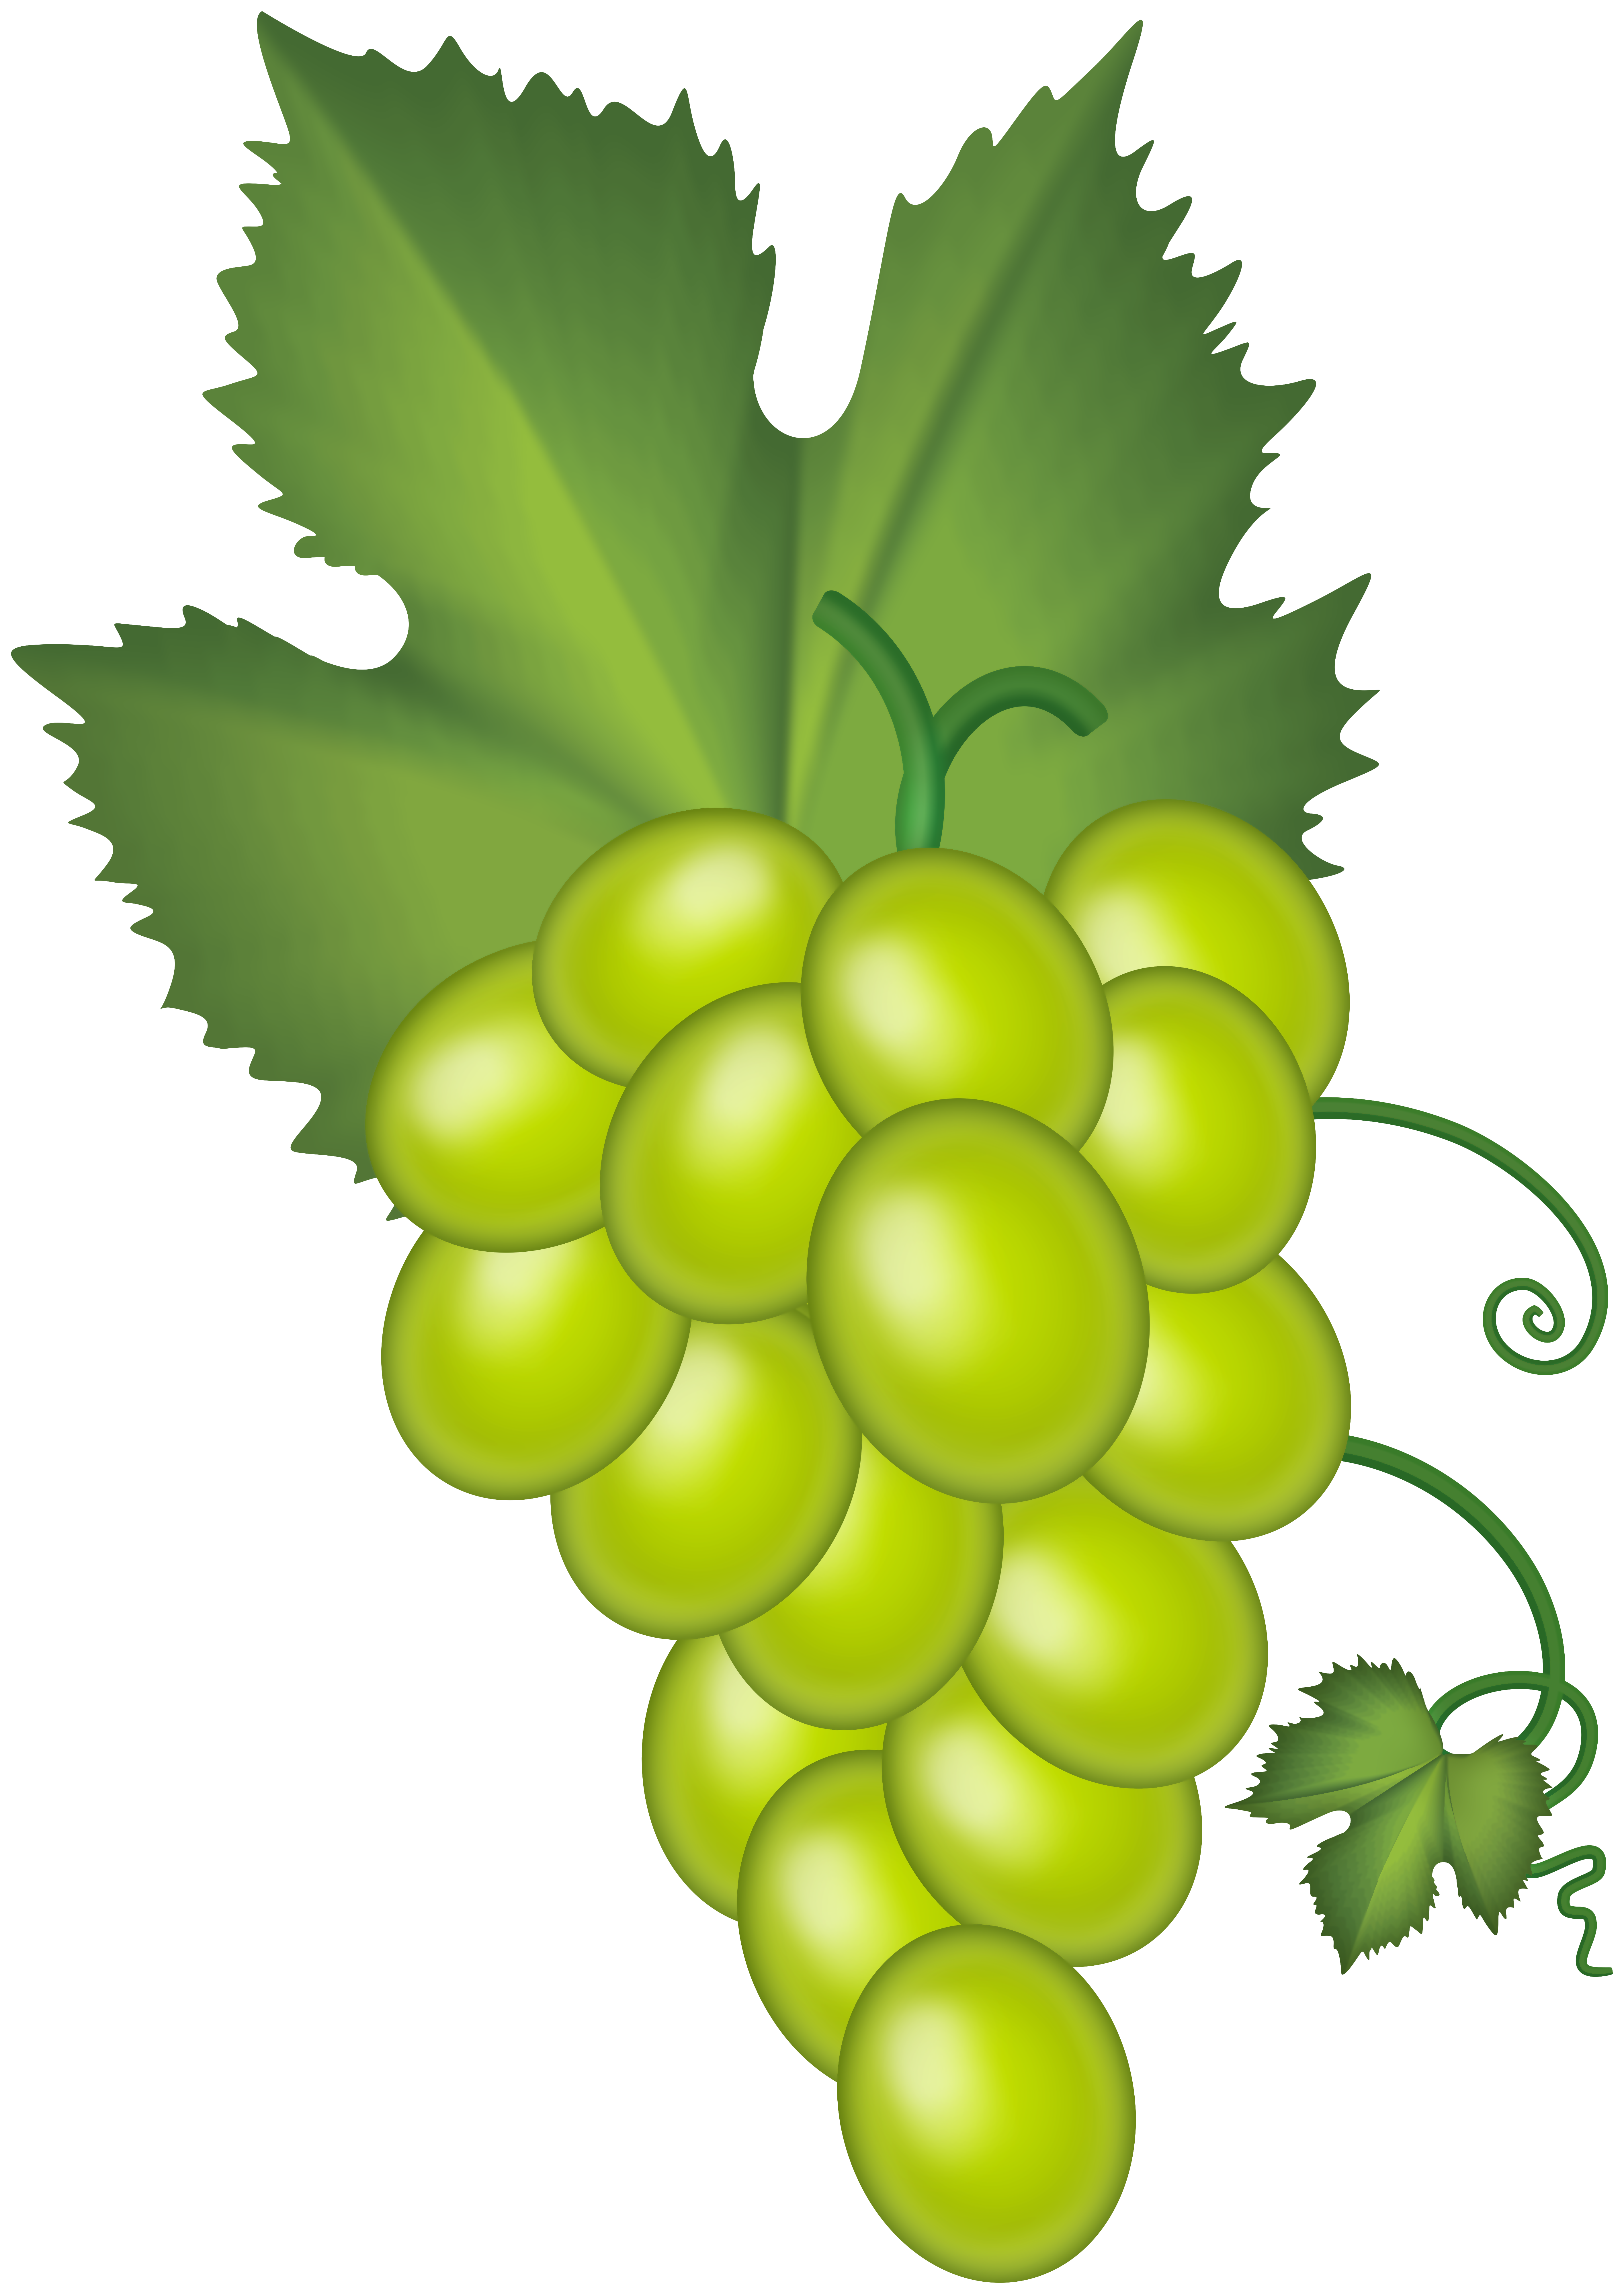 grapes clipart high quality